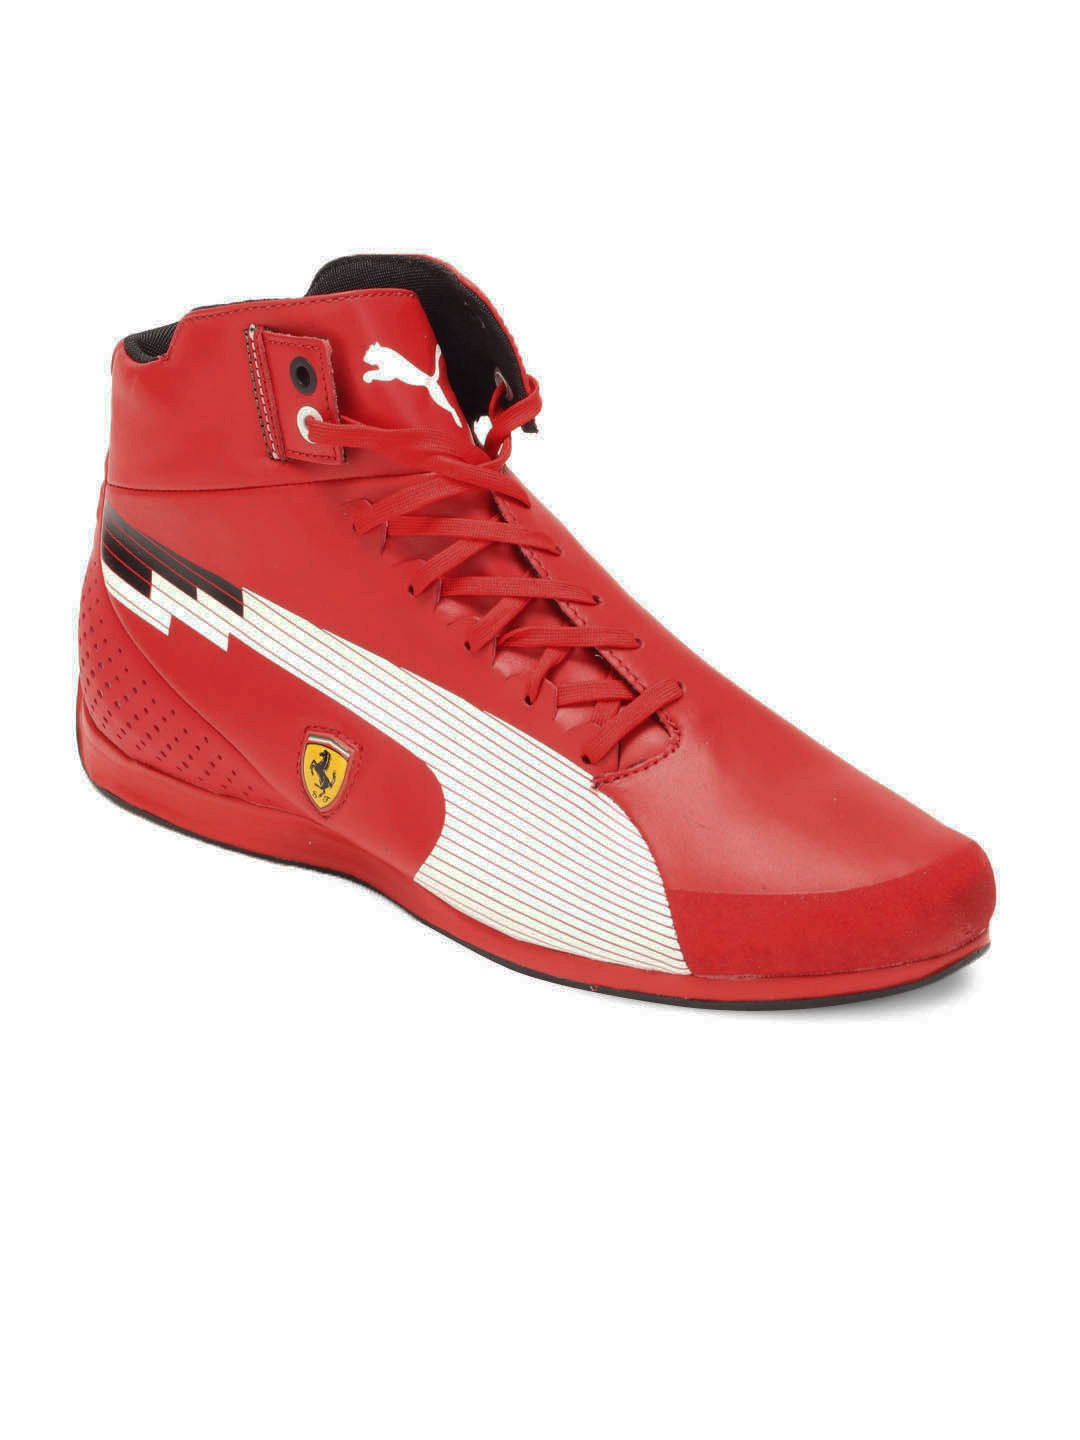 puma high ankle shoes for mens